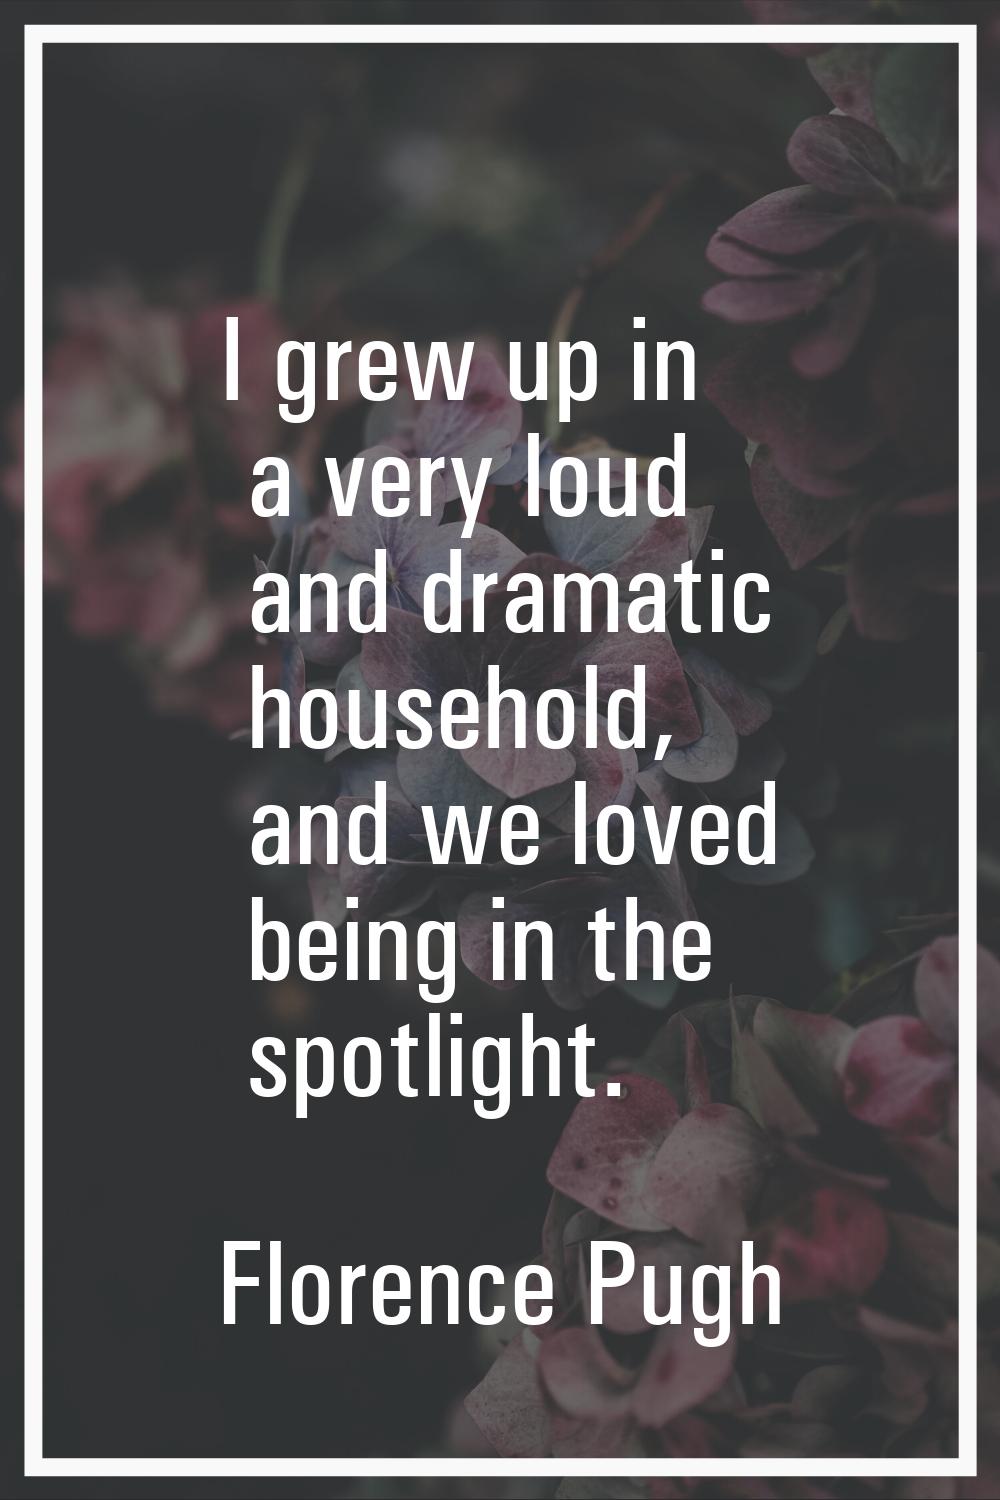 I grew up in a very loud and dramatic household, and we loved being in the spotlight.